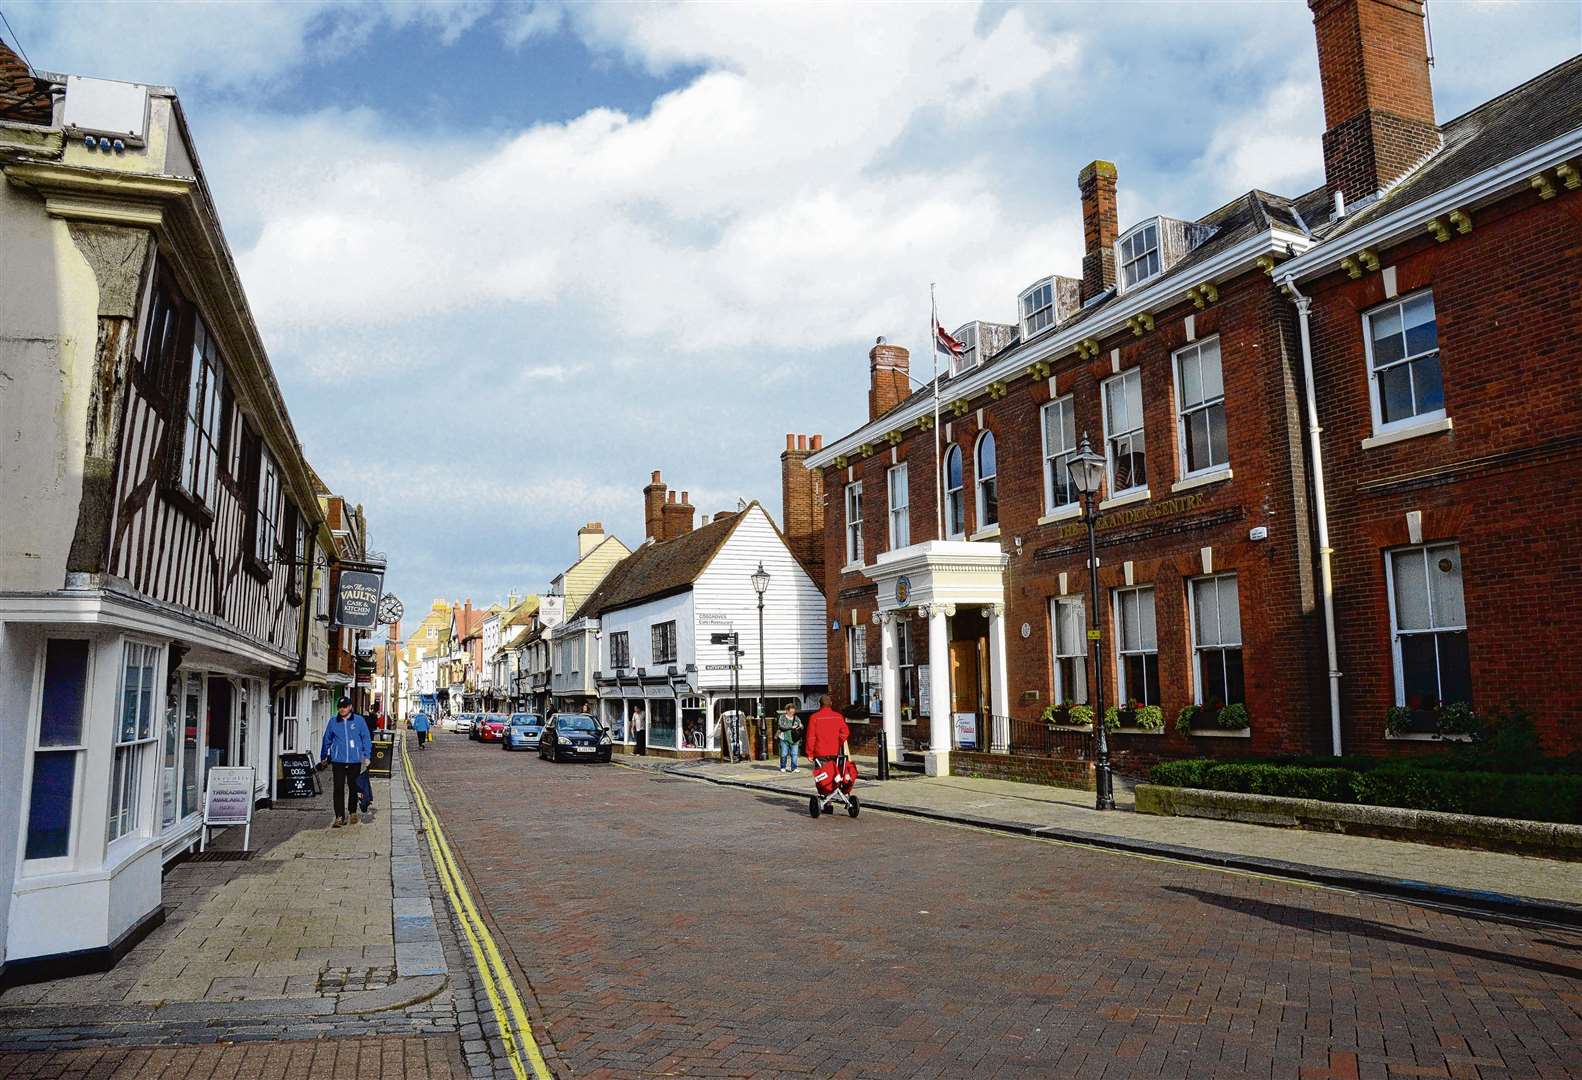 Vicky Wells says she could not find anywhere in Faversham to rent